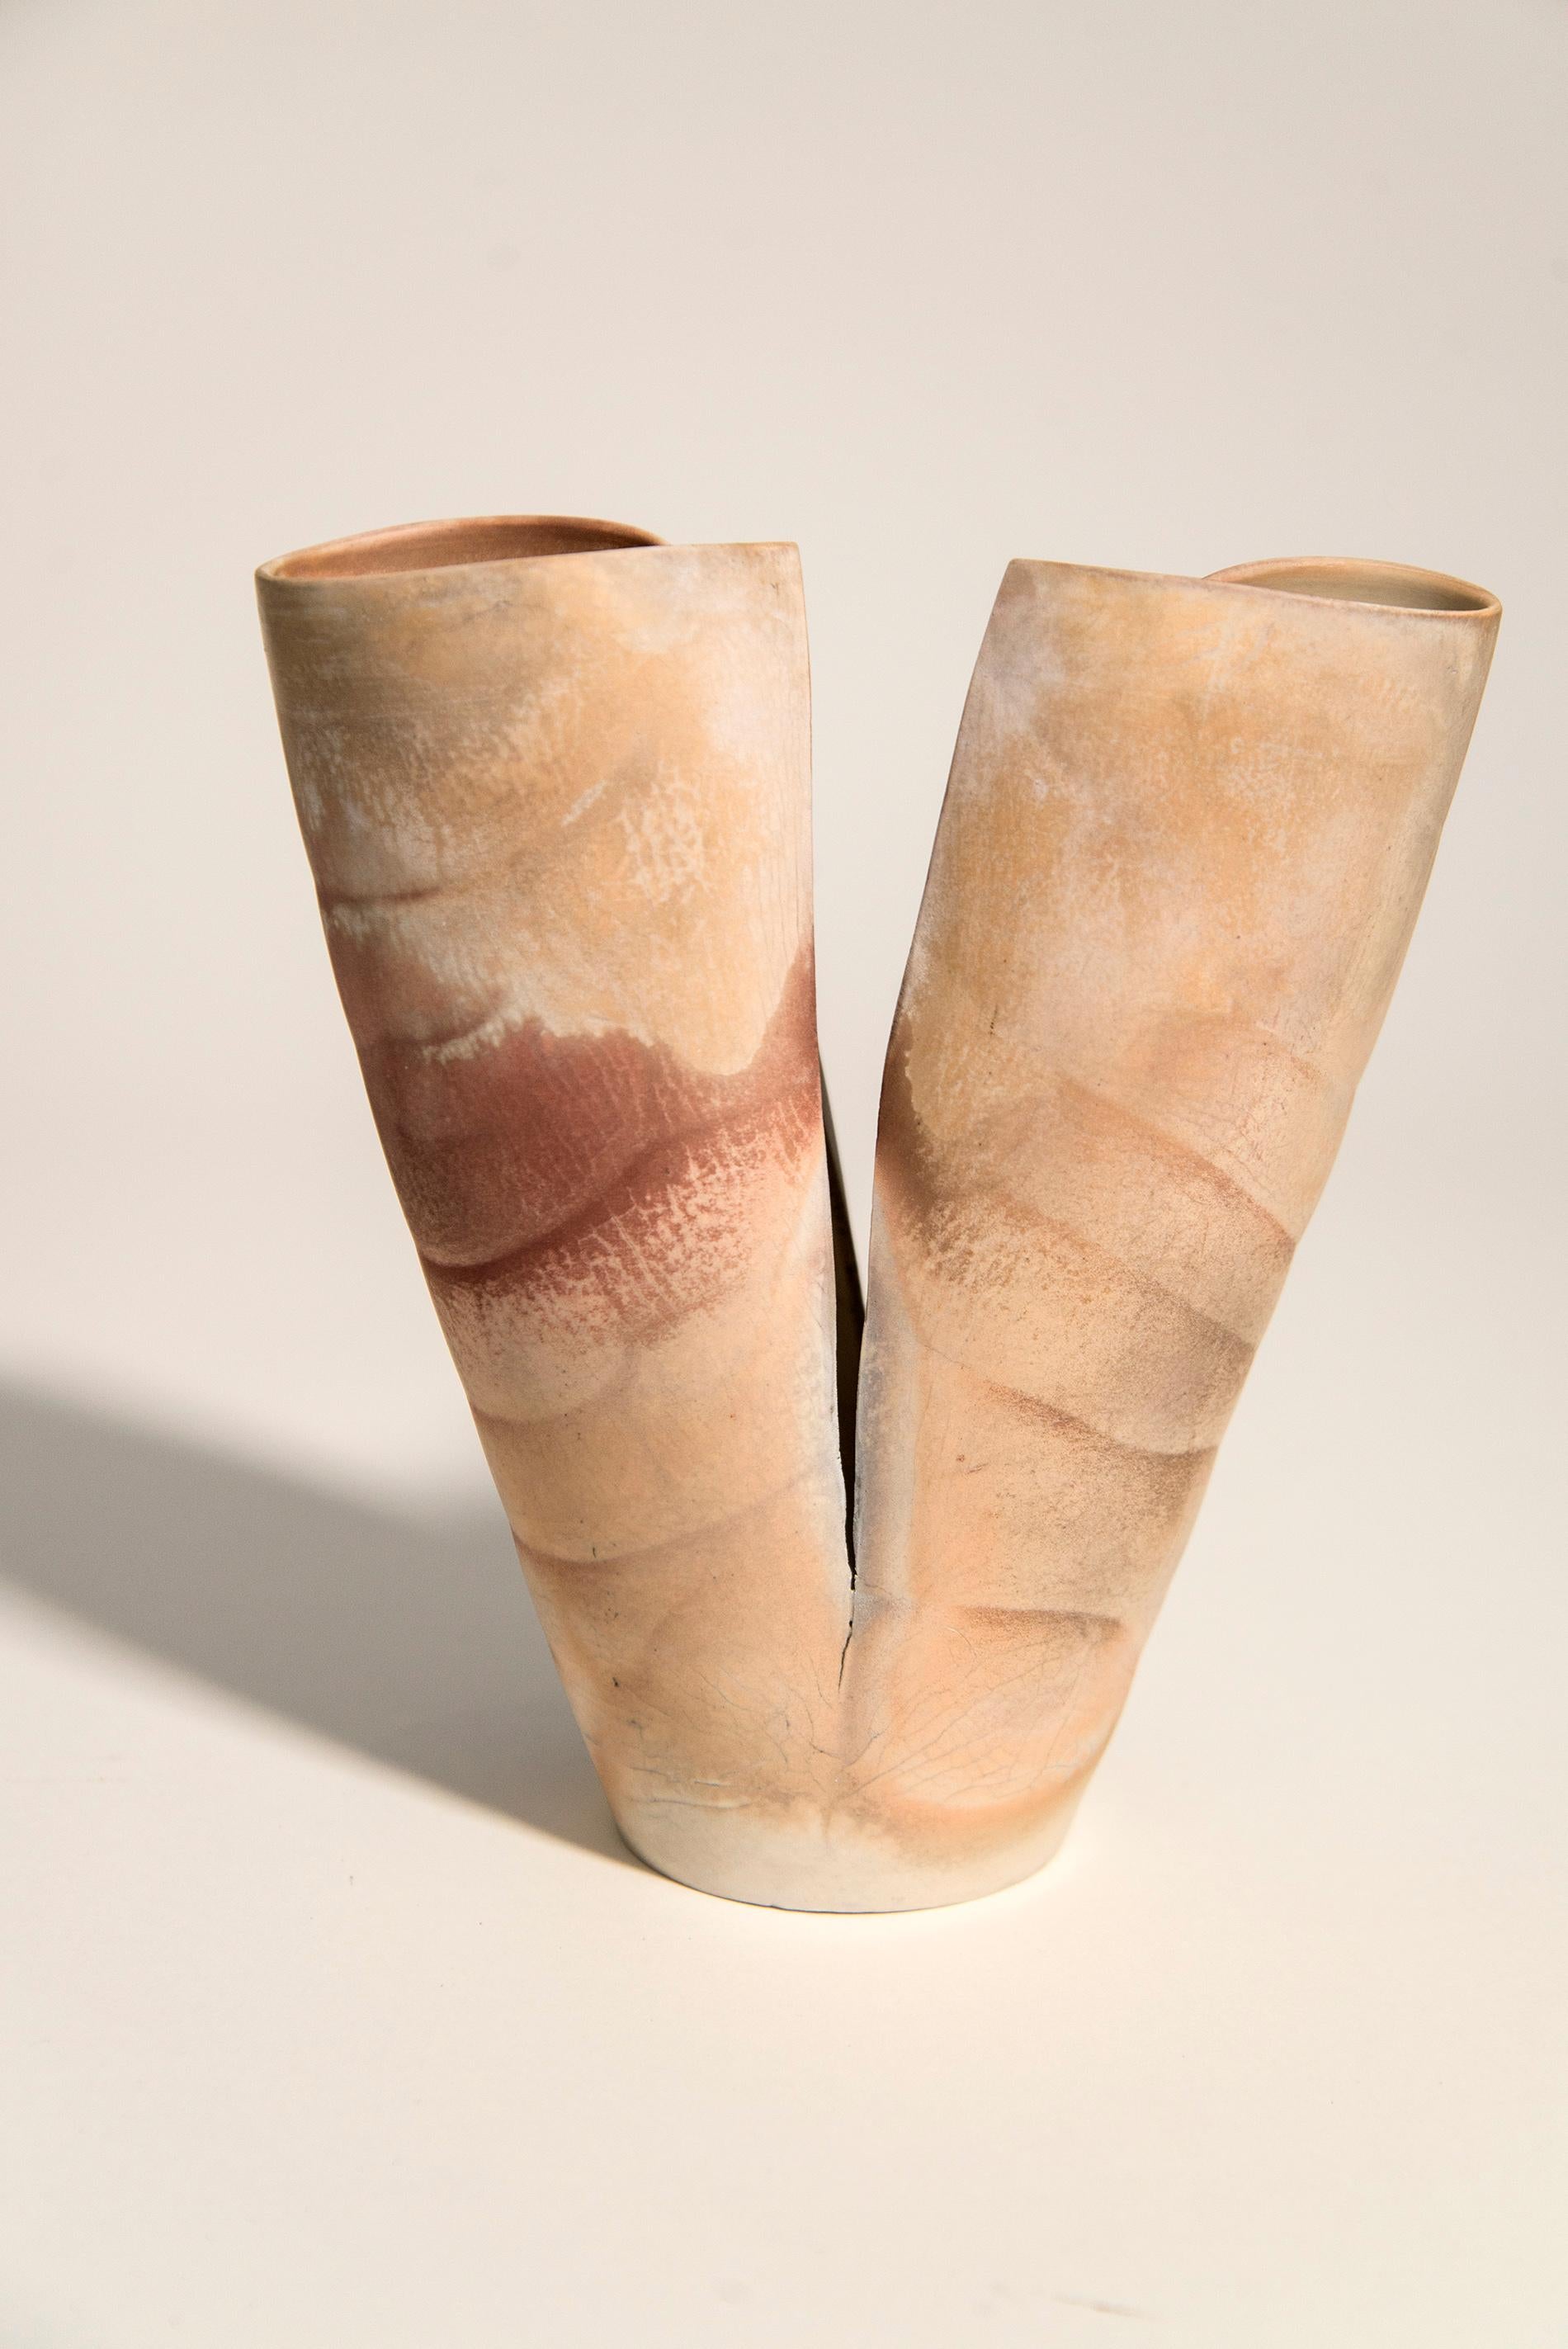 Joined at the Hip - intricate, nature-inspired, hand-shaped porcelain sculpture - Contemporary Sculpture by Paula Murray